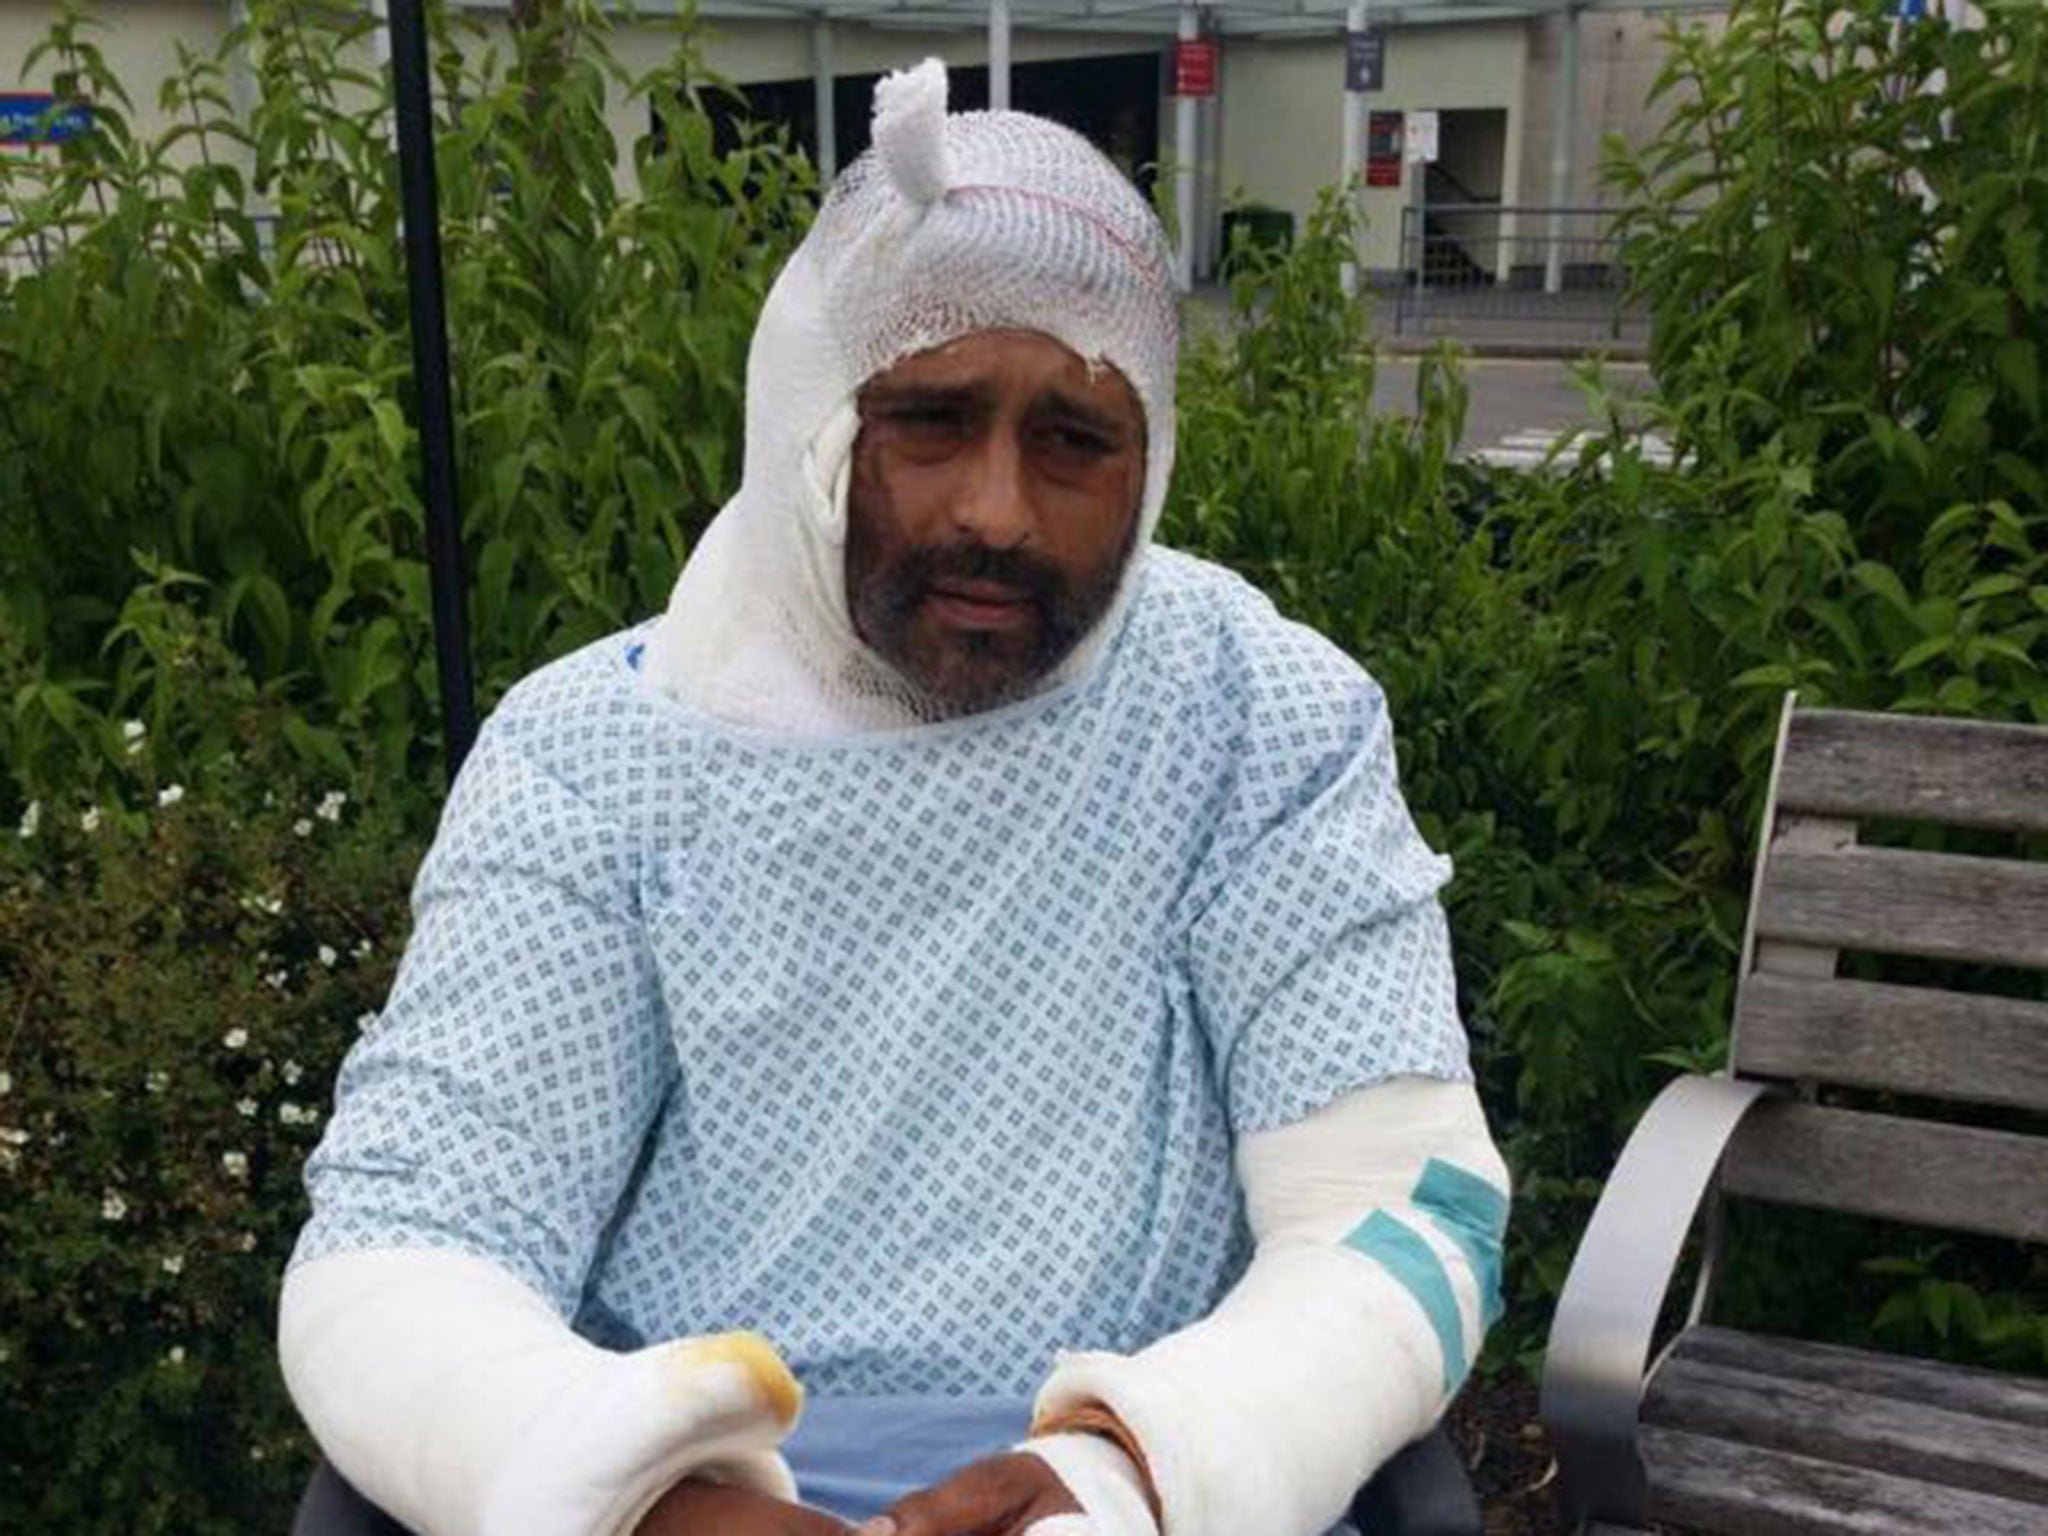 Jameel Mukhtar, 37, suffered life-changing injuries in an acid attack on 21 June